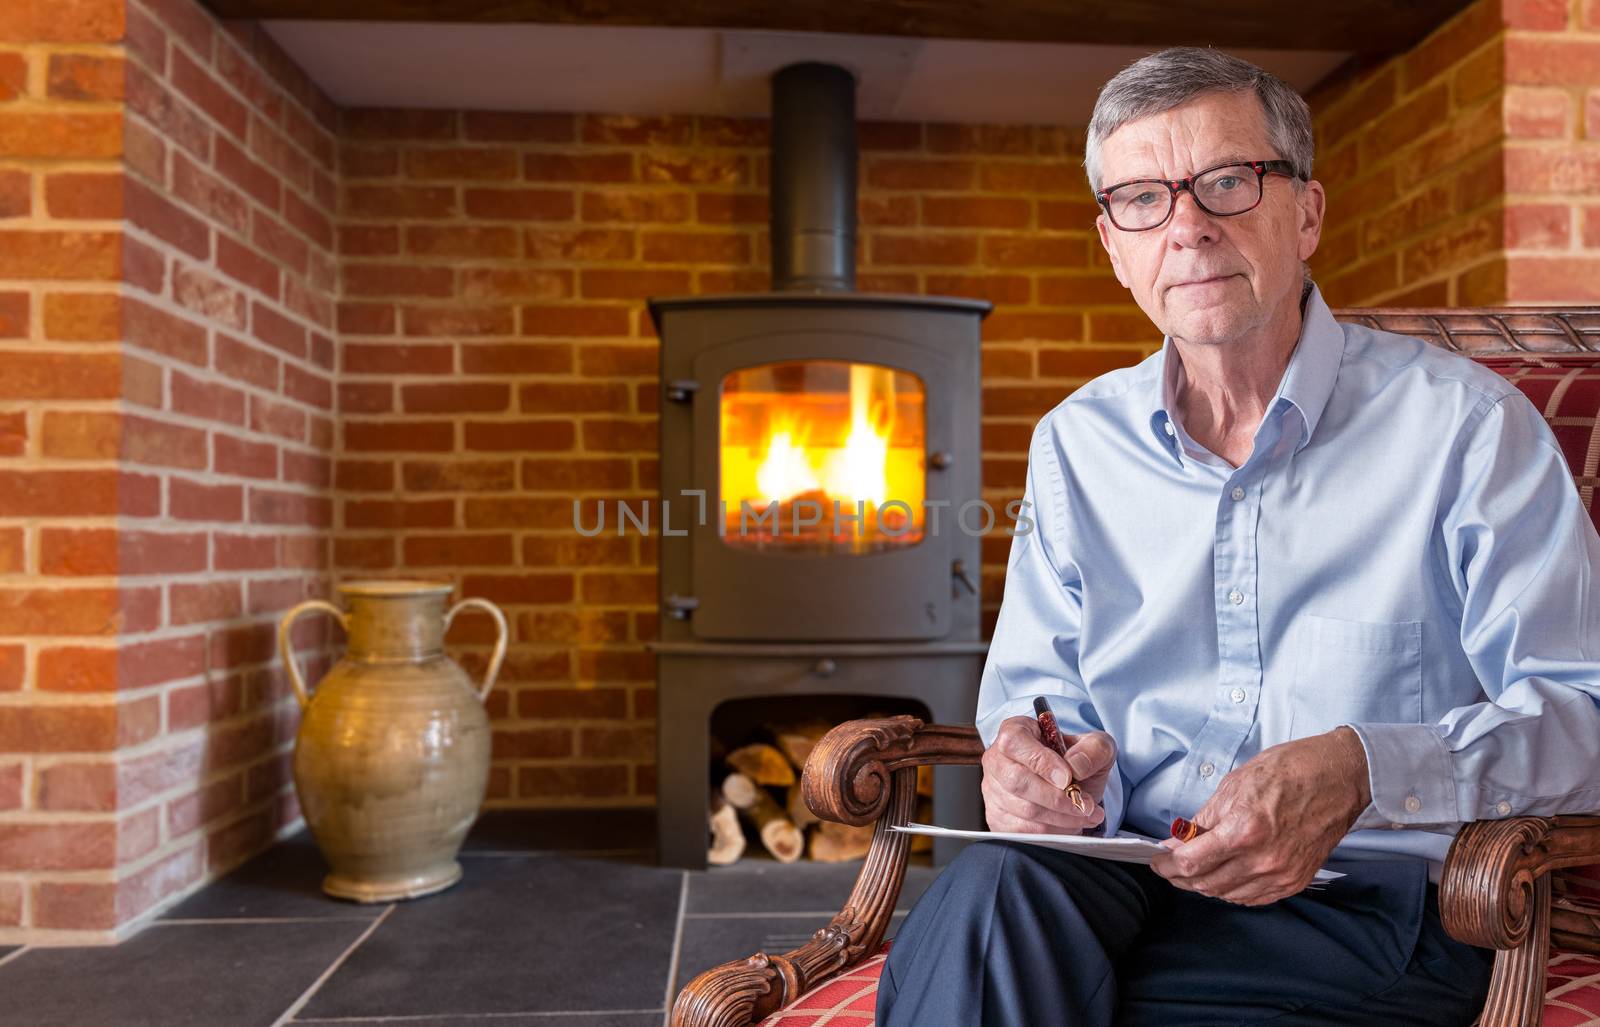 Senior man with spectacles checking a document with fireplace in background by steheap